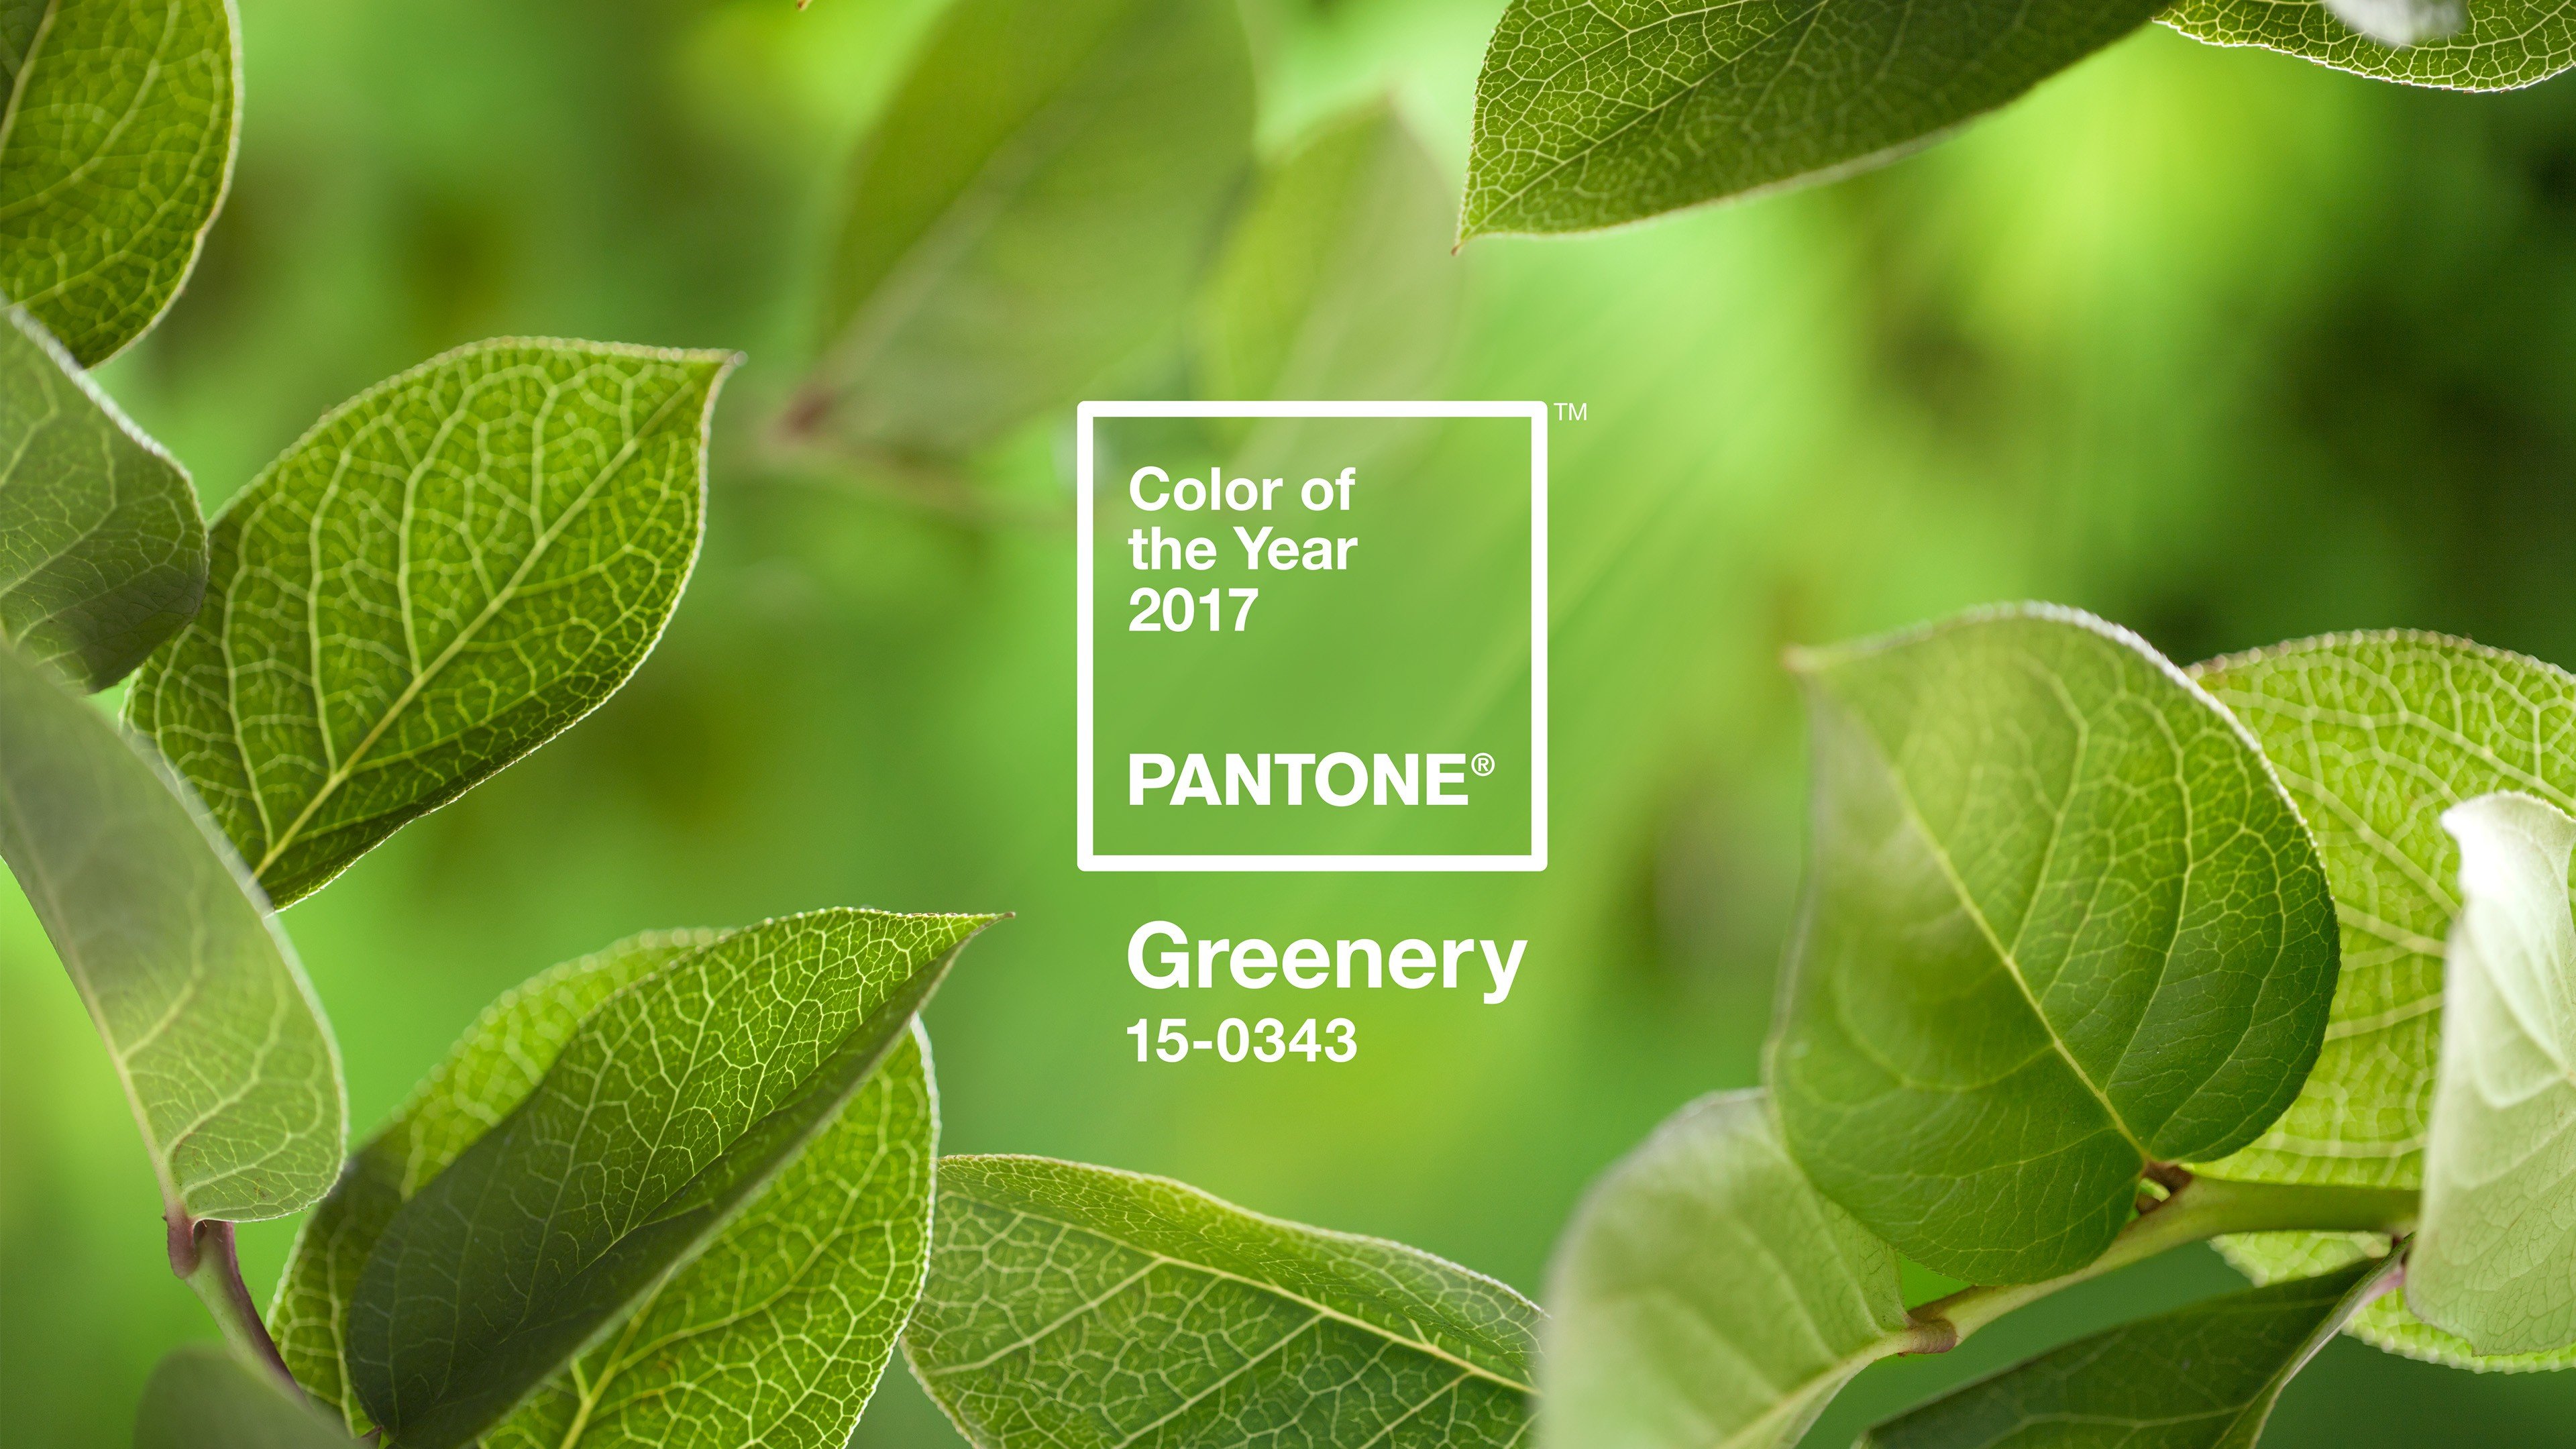 color codes, Green, Landscape, Colorful, Logo, Leaves, Trees, Simple Wallpaper